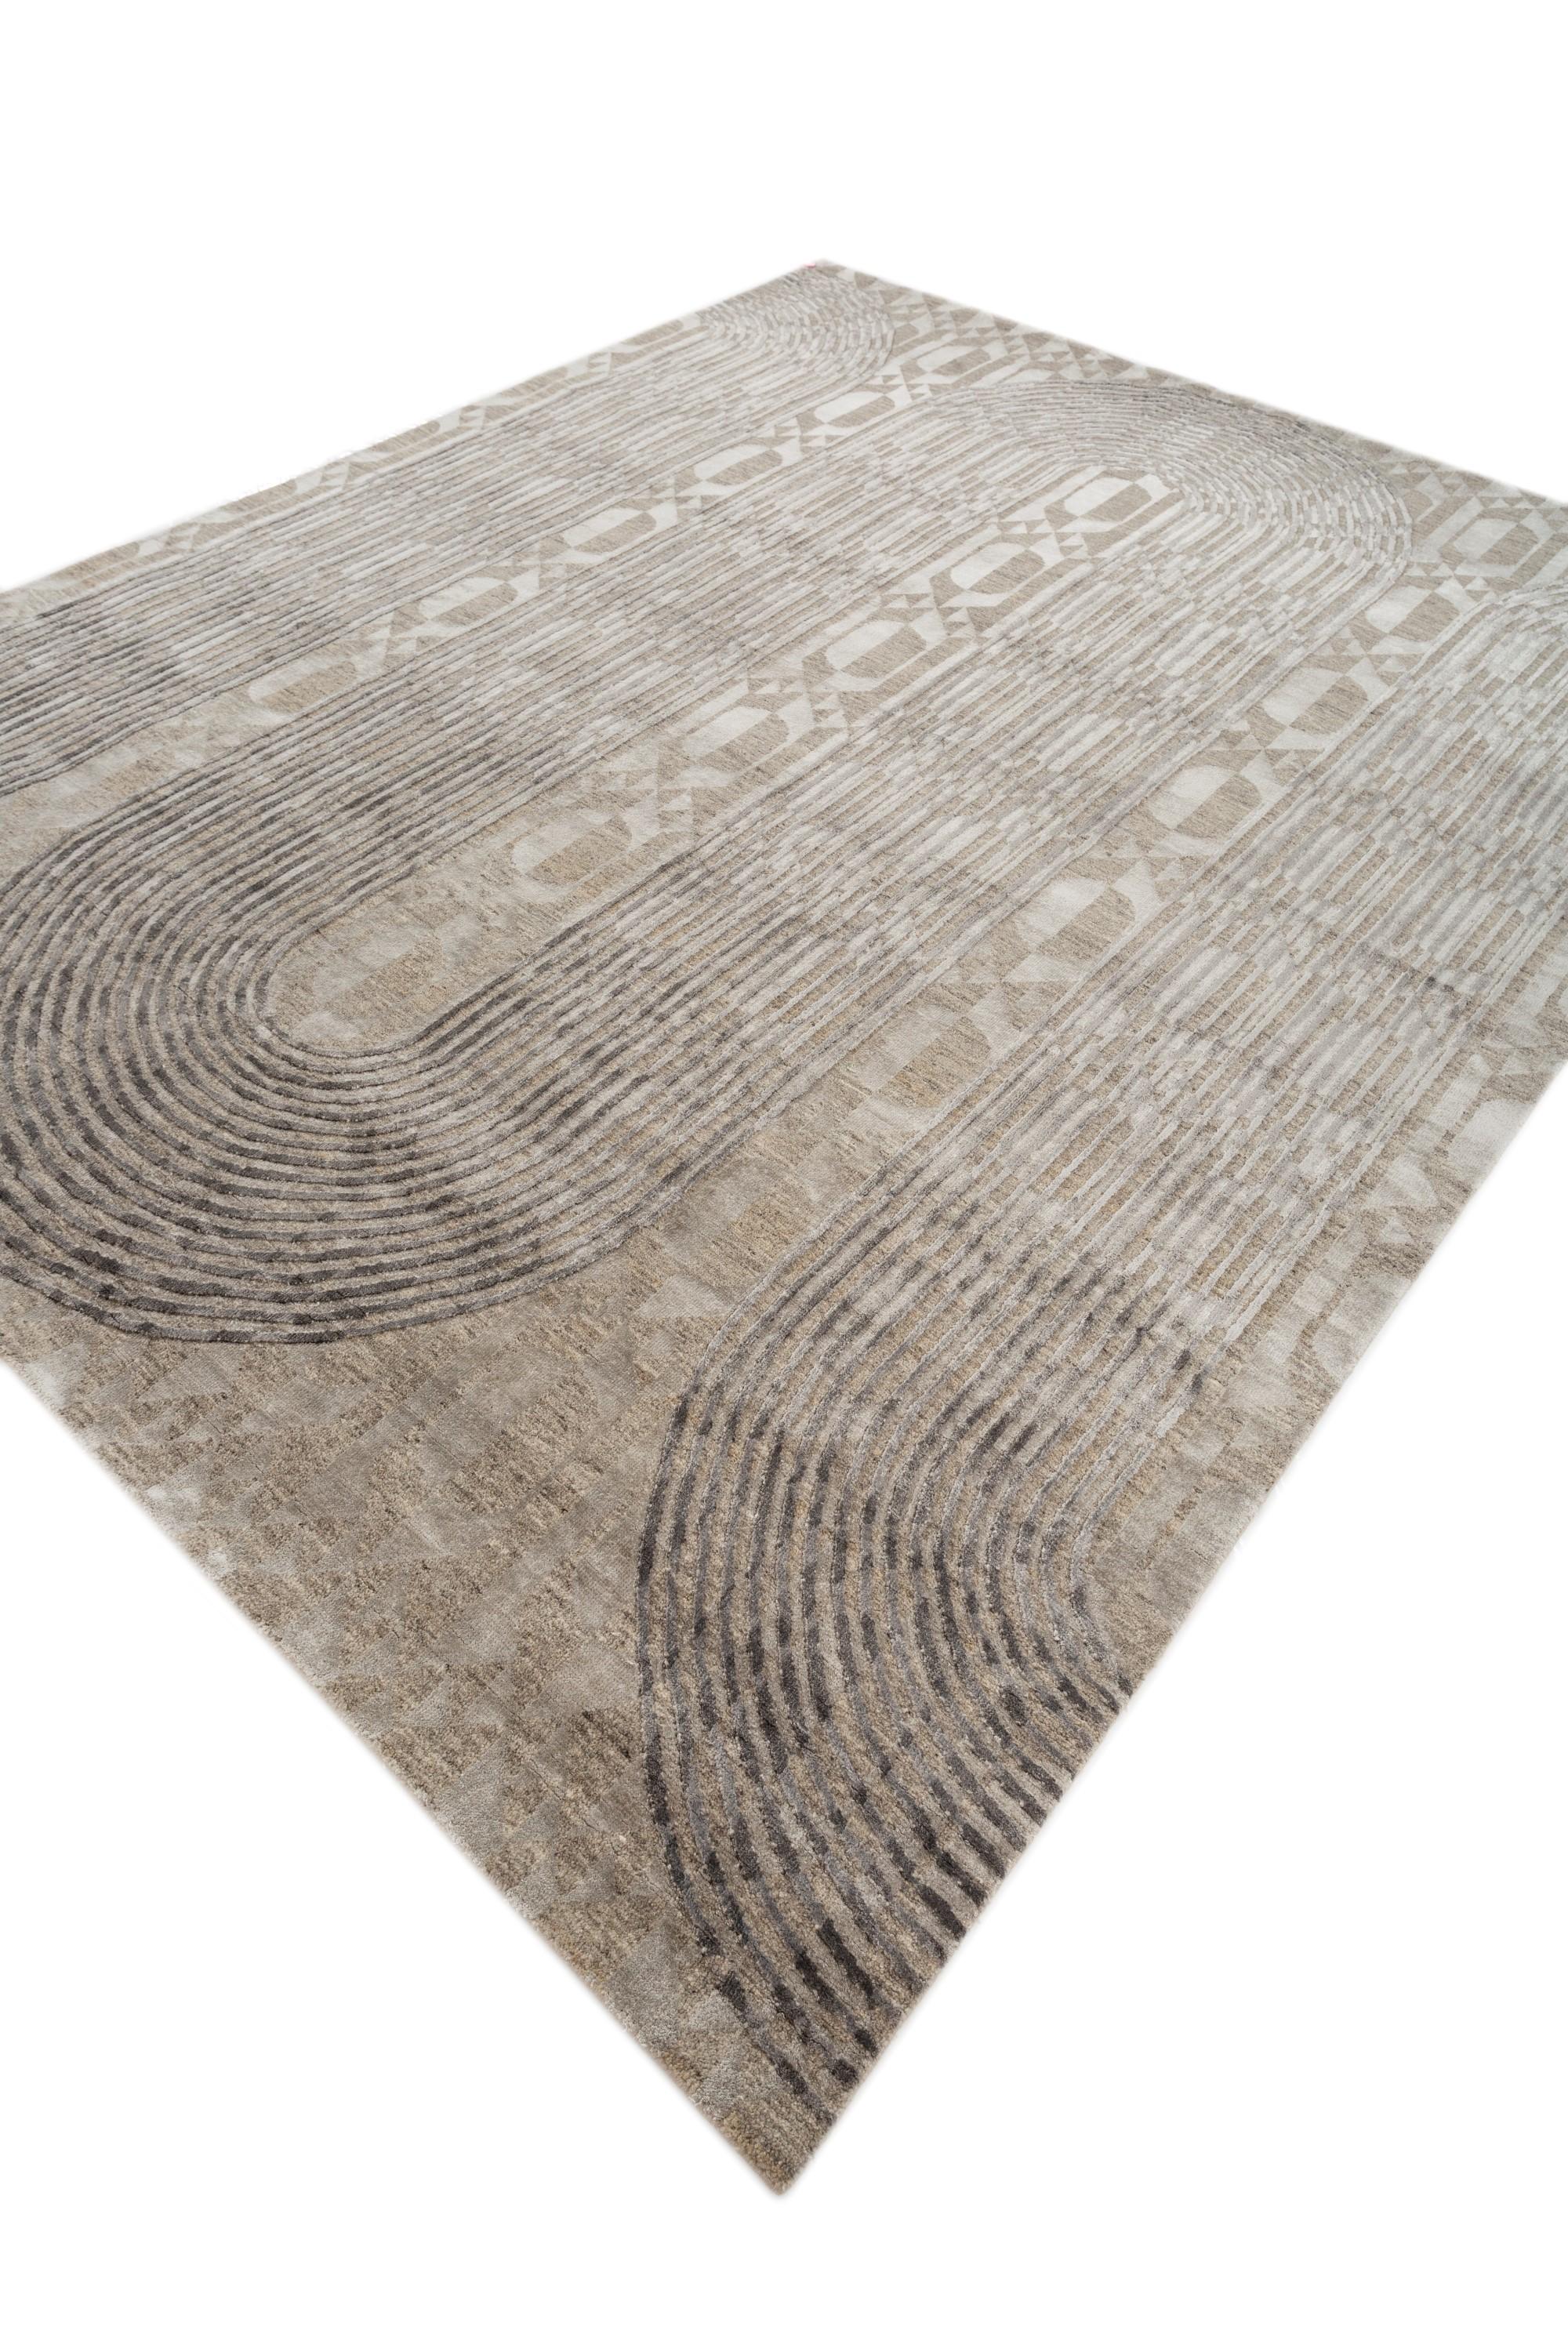 Modern Urban elegance natural gray & liquorice 240X300 cm handknotted rug For Sale